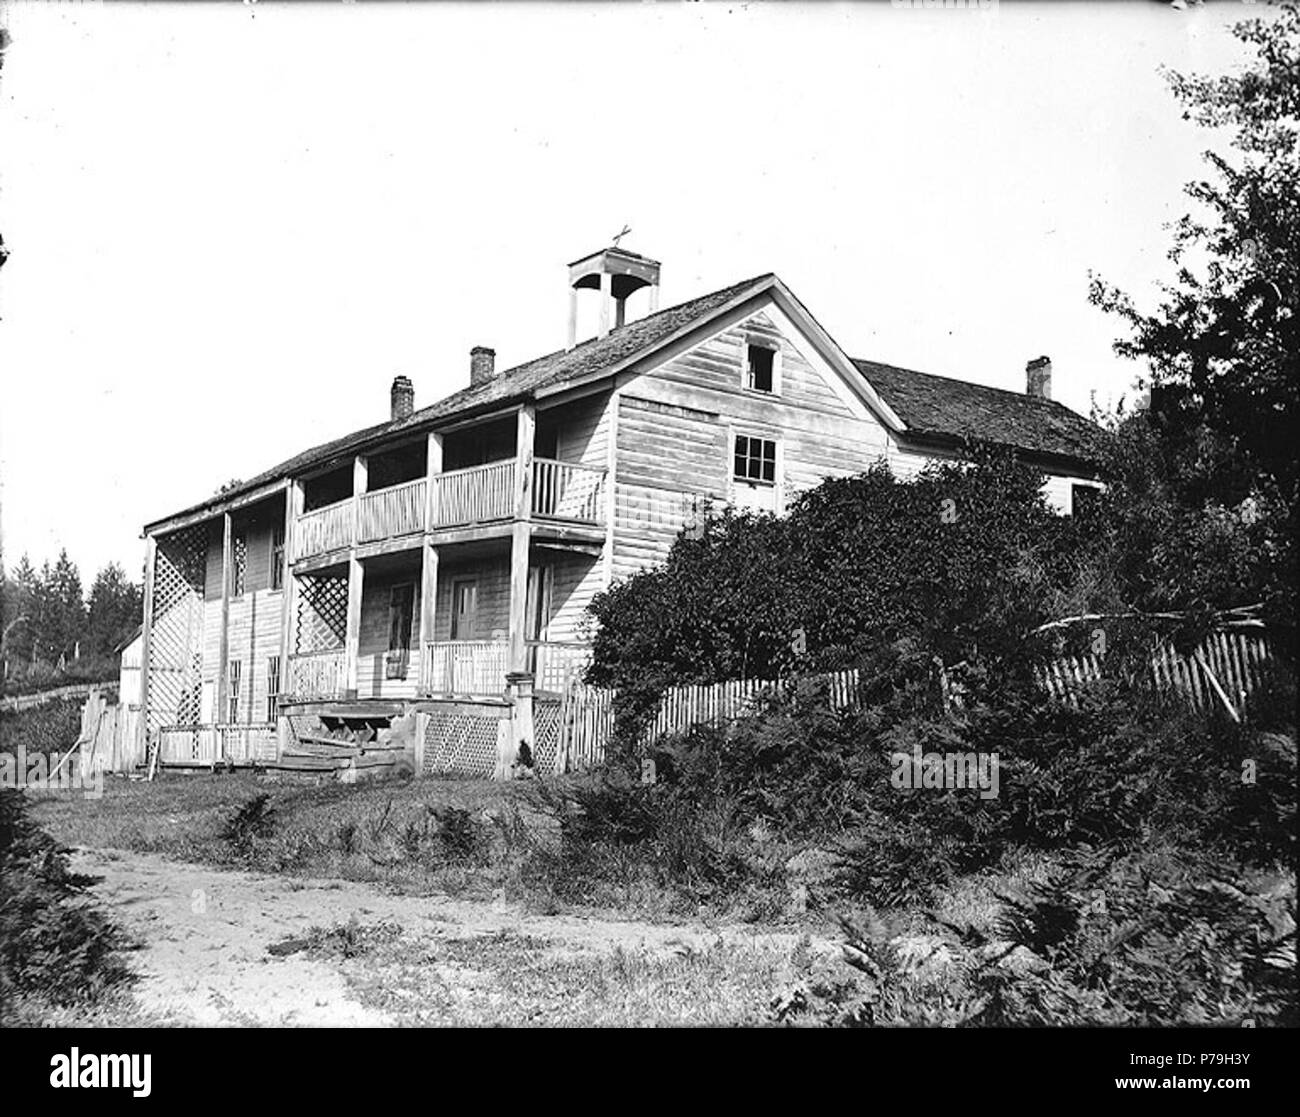 . English: Former site of the Providence School for Young Ladies, Steilacoom, Washington, ca. 1907. English: Located next to the Immaculate Conception Mission, the school was operated by the Sisters of Charity from 1864 to 1875. Subjects (LCTGM): Private schools--Washington (State)--Steilacoom Subjects (LCSH): Providence School for Young Ladies (Steilacoom, Wash.); Girls' schools--Washington (State)--Steilacoom; Steilacoom (Wash.)--Buildings, structures, etc.  . circa 1907 20 Former site of the Providence School for Young Ladies, Steilacoom, Washington, ca 1907 (BAR 185) Stock Photo